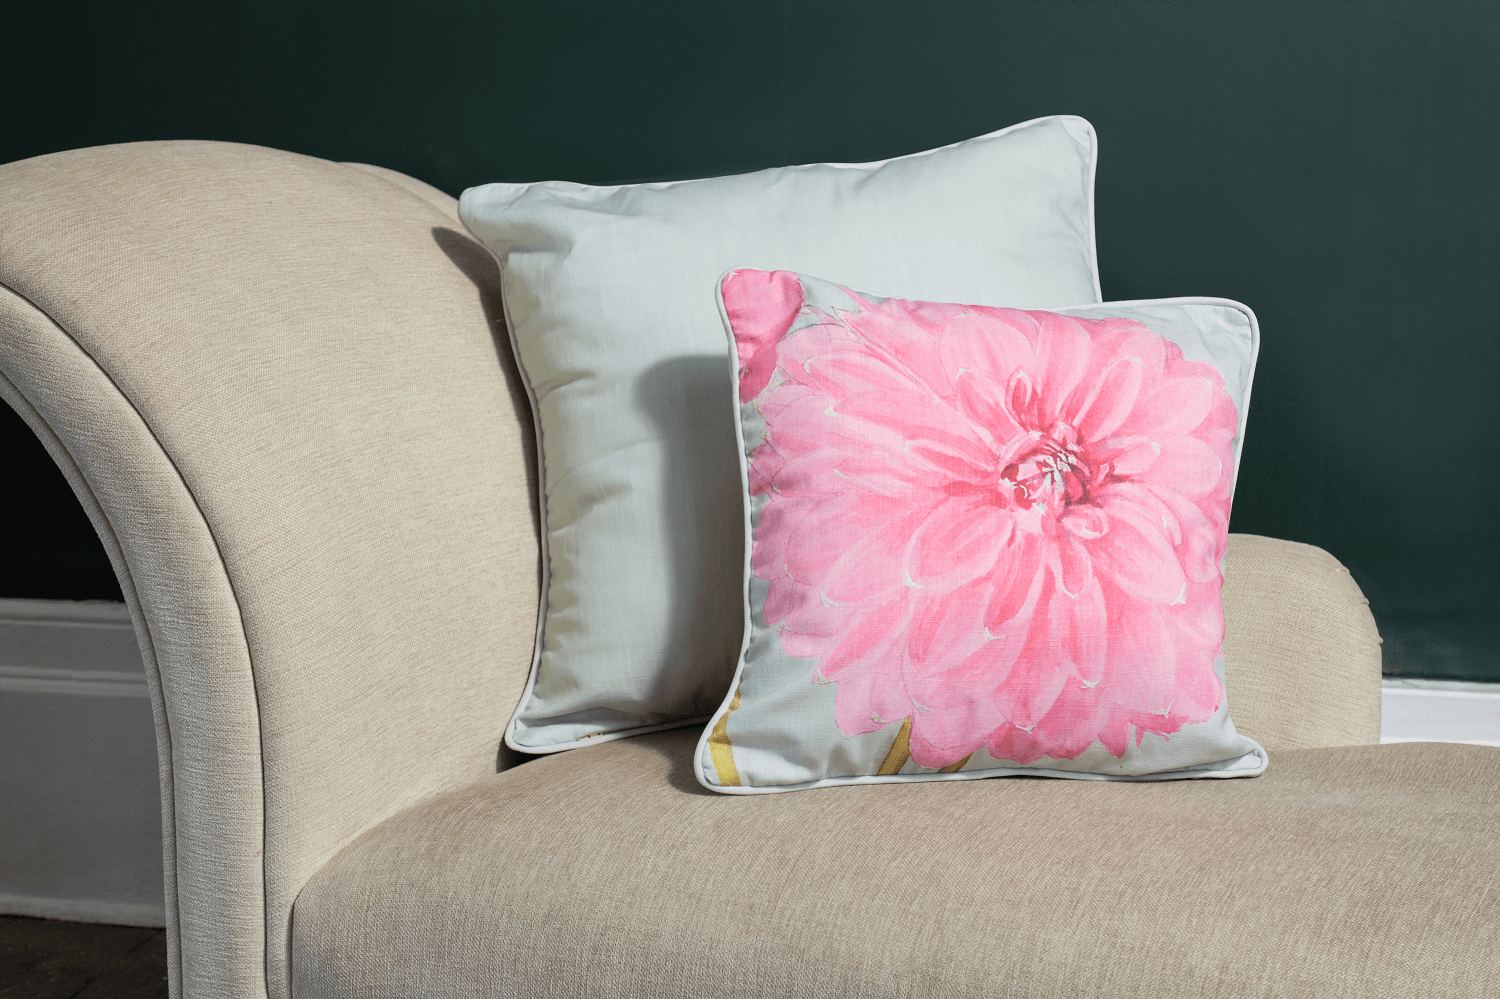 Dahlia Cheal's Pink Single Flower - Alfred Wise Cushion